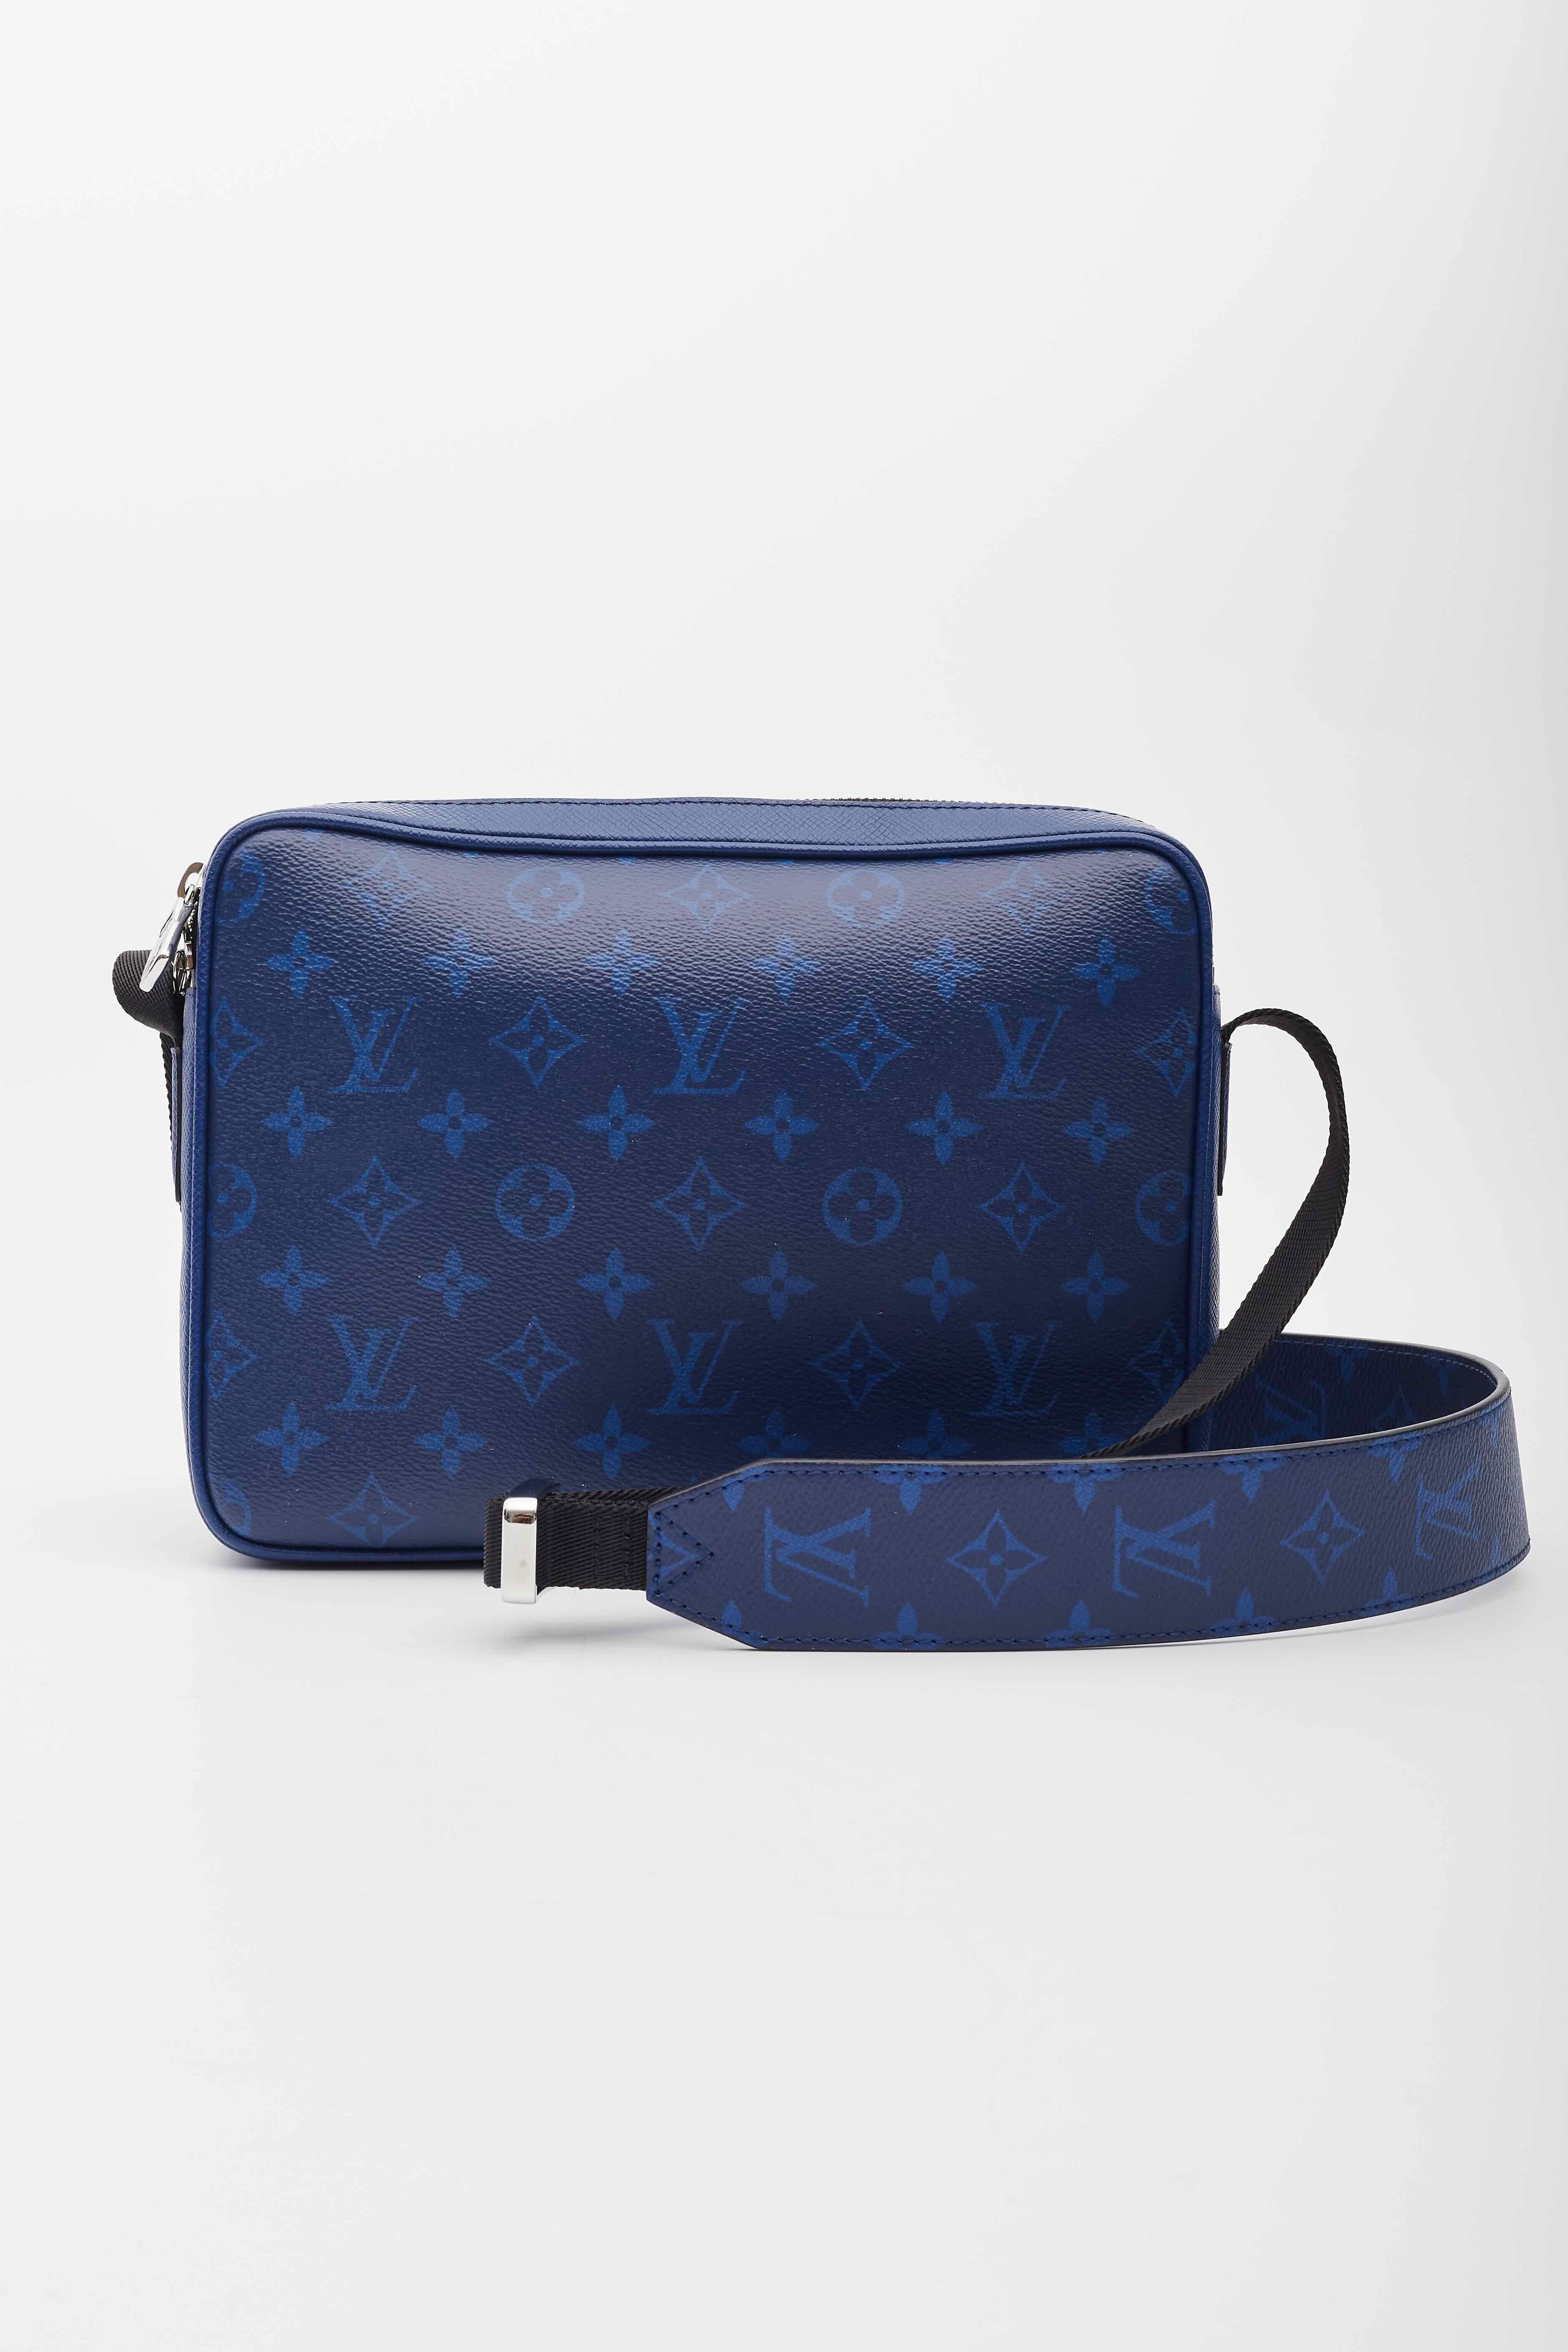 This messenger bag is made of royal blue cross-grain taiga leather, with classic Louis Vuitton monogram-coated canvas accents. The bag features a front zipper pocket and an adjustable coated canvas shoulder strap with polished silver hardware. The